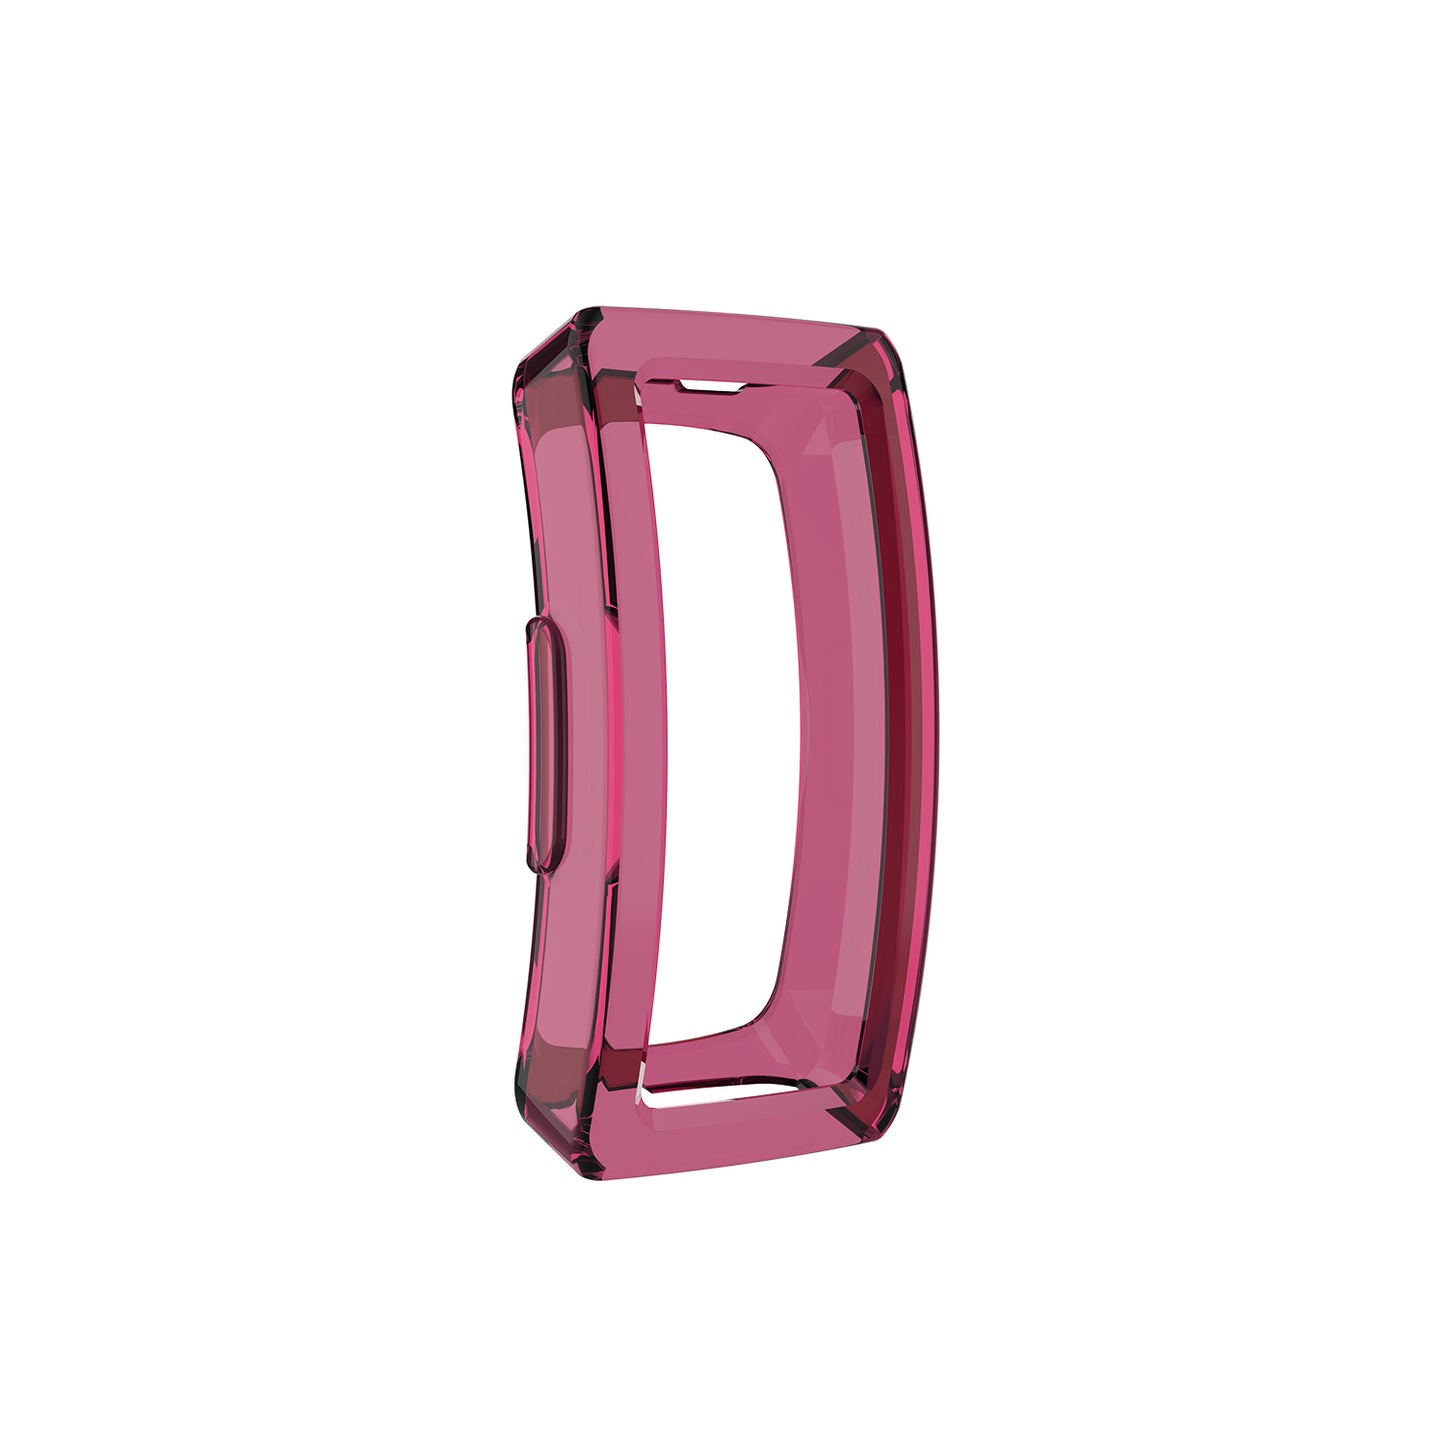 Rubber Protective Case for Fitbit Inspire & Inspire HR